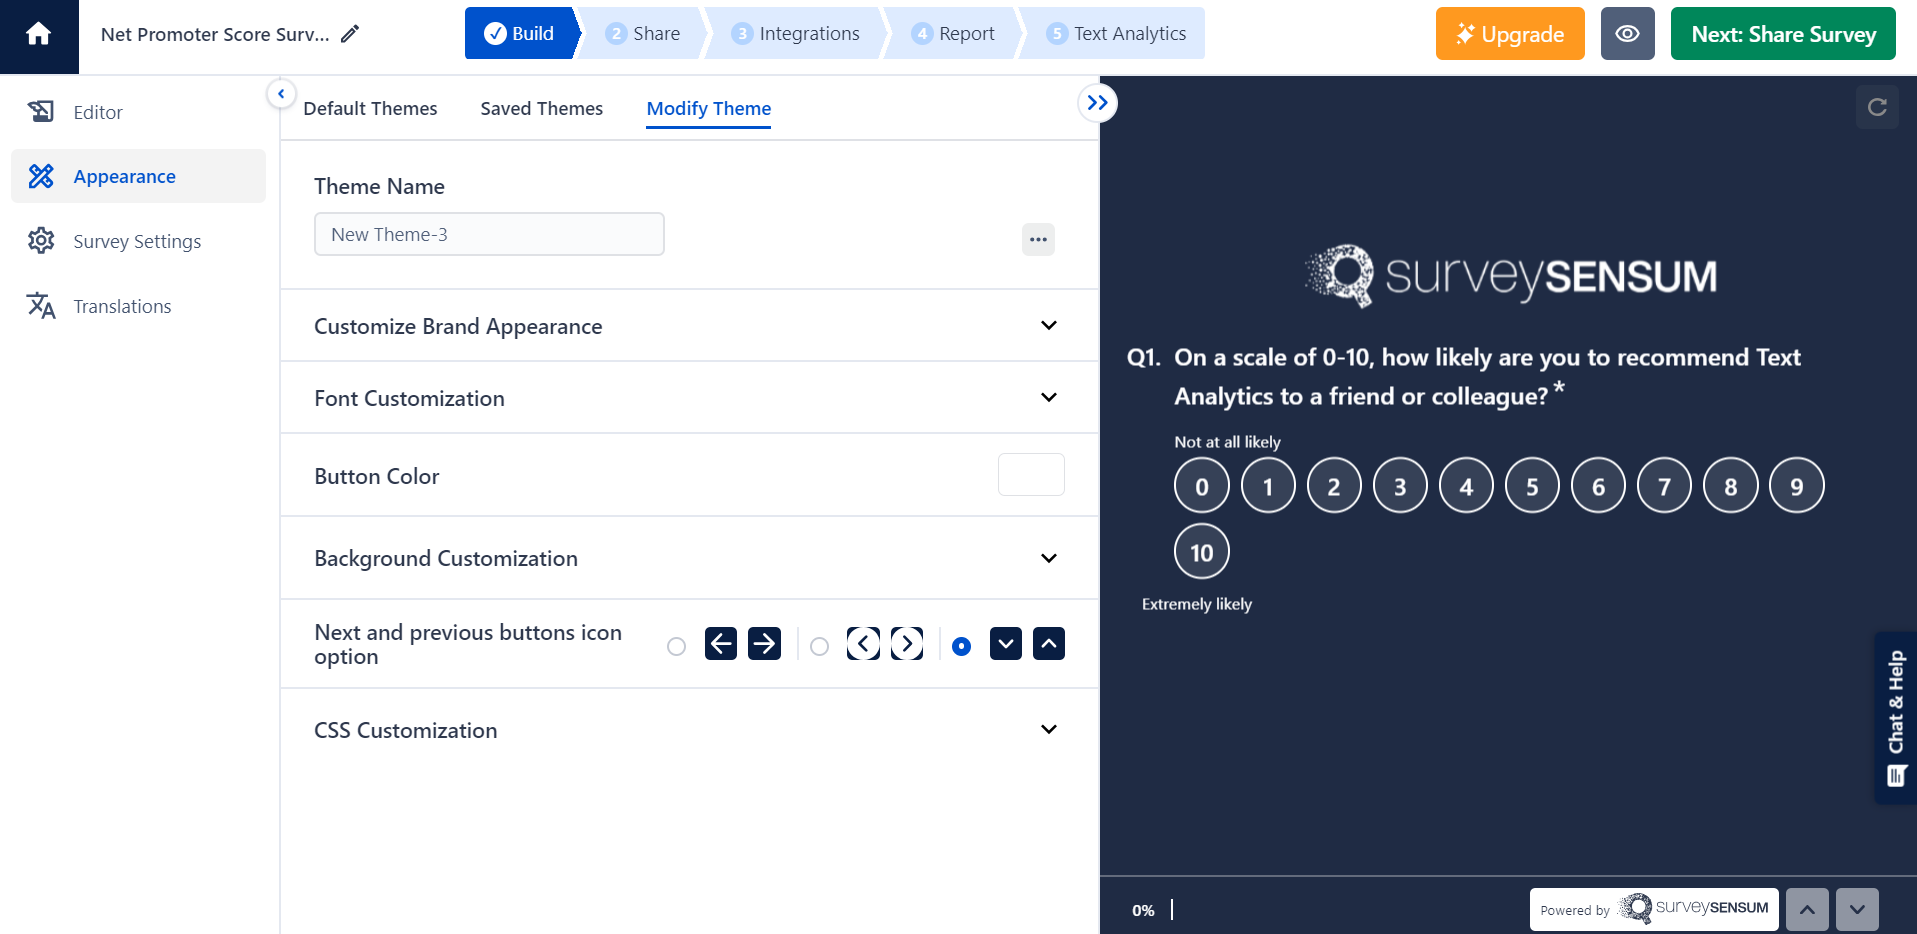  This is the image of the personalization element of the SurveySesnum survey builder tool. Users can edit the appearance of their surveys by changing the theme, brand appearance, etc. 